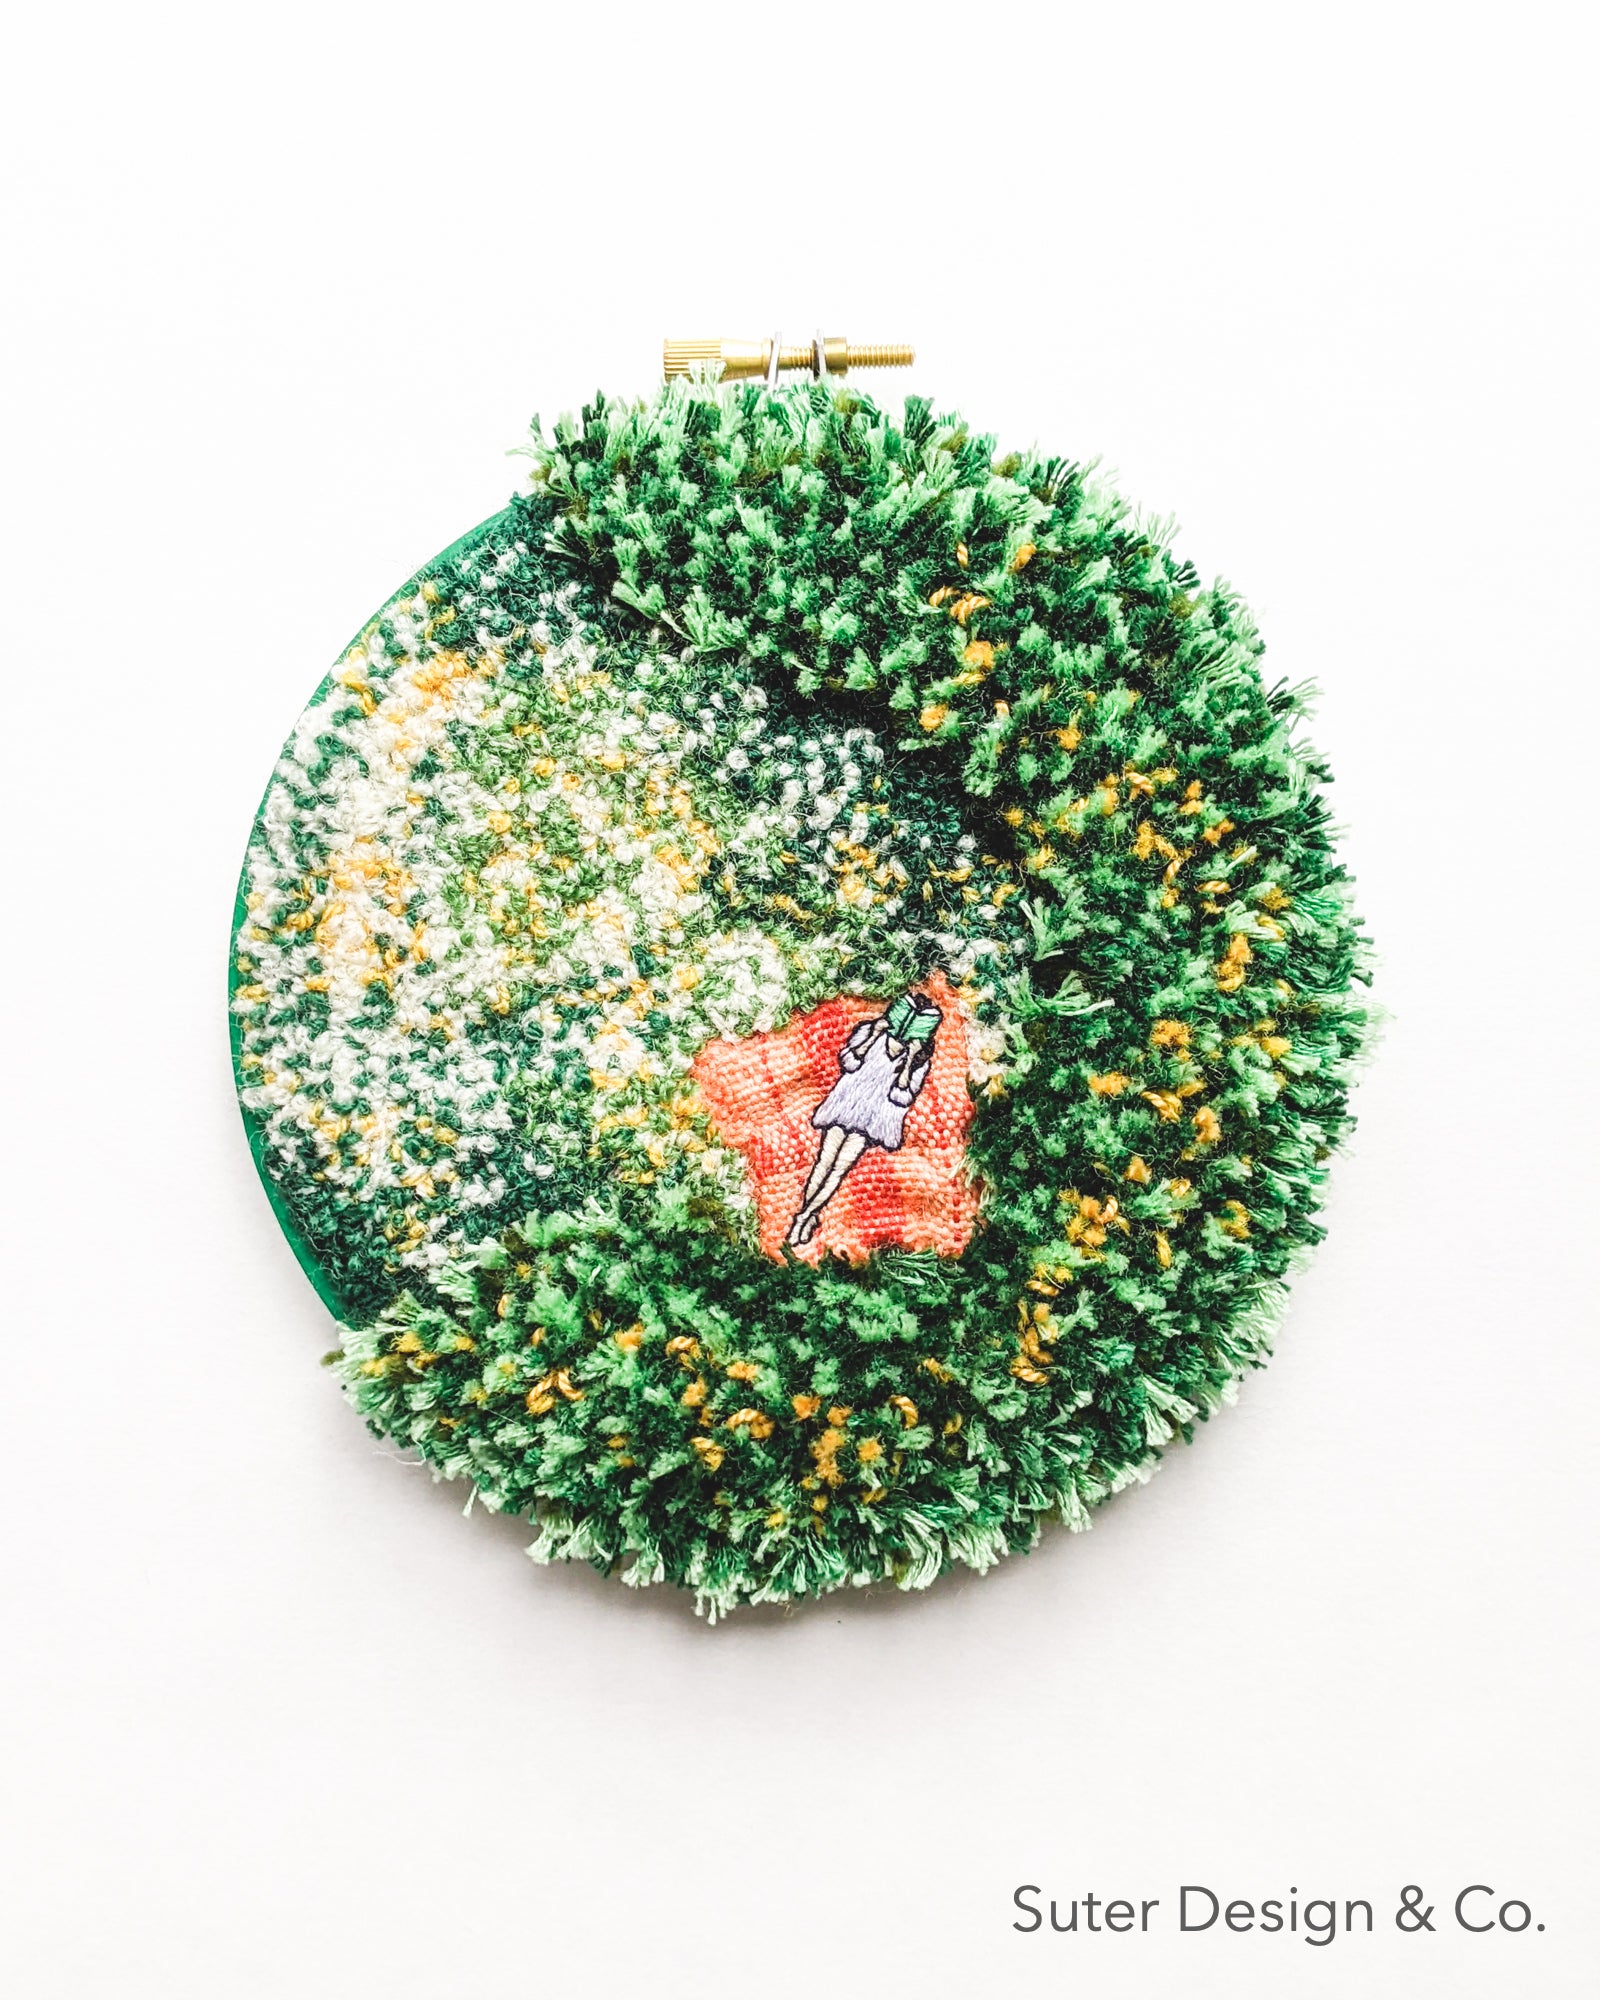 "Escape to Daffodil Meadow" - Afternoon Picnic - 5 inch hoop